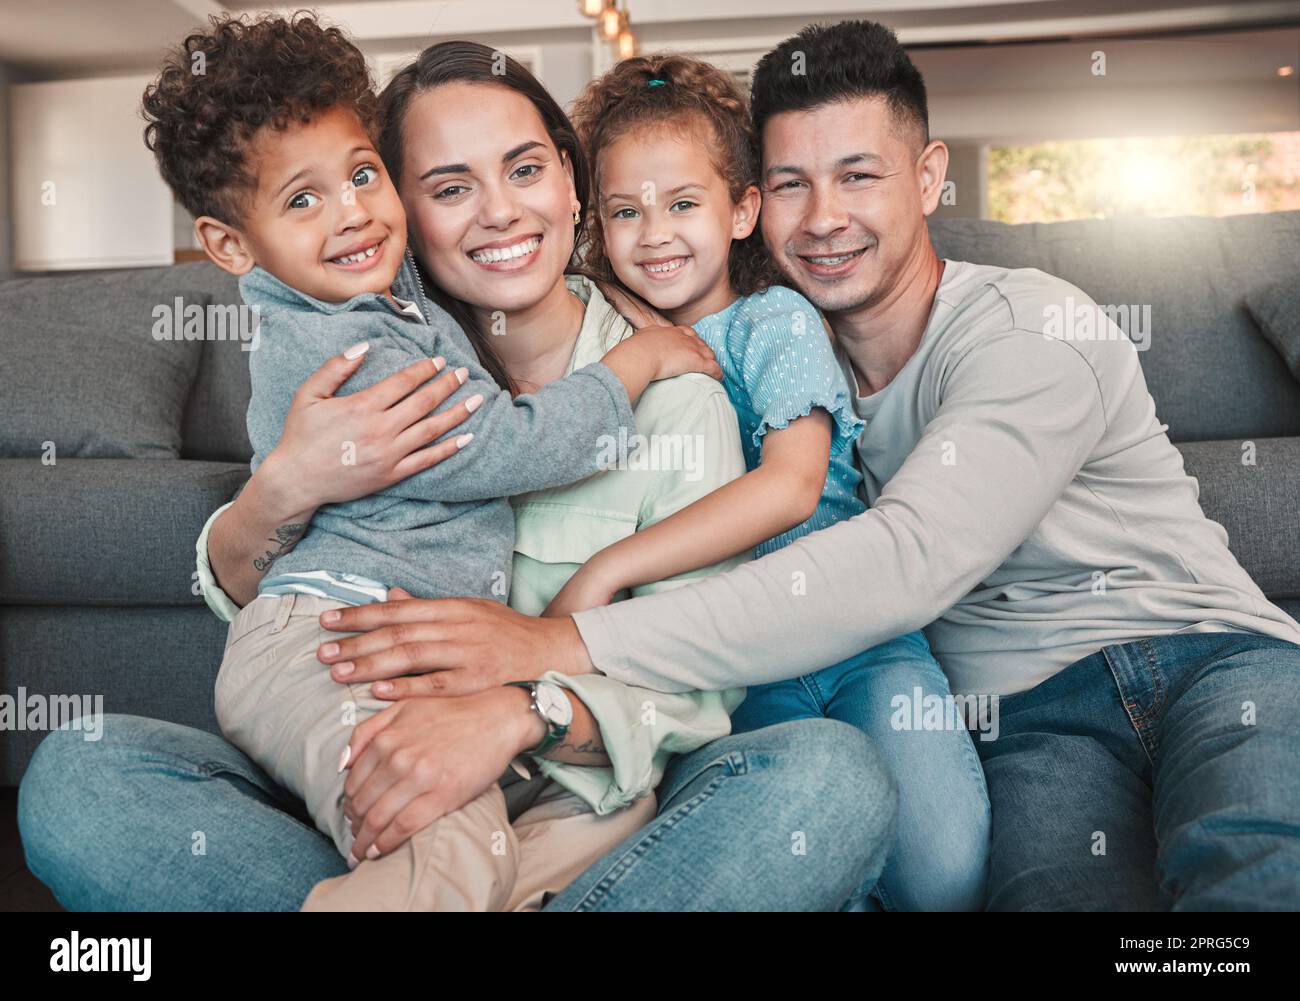 They make life fun. a young family spending time together at home. Stock Photo